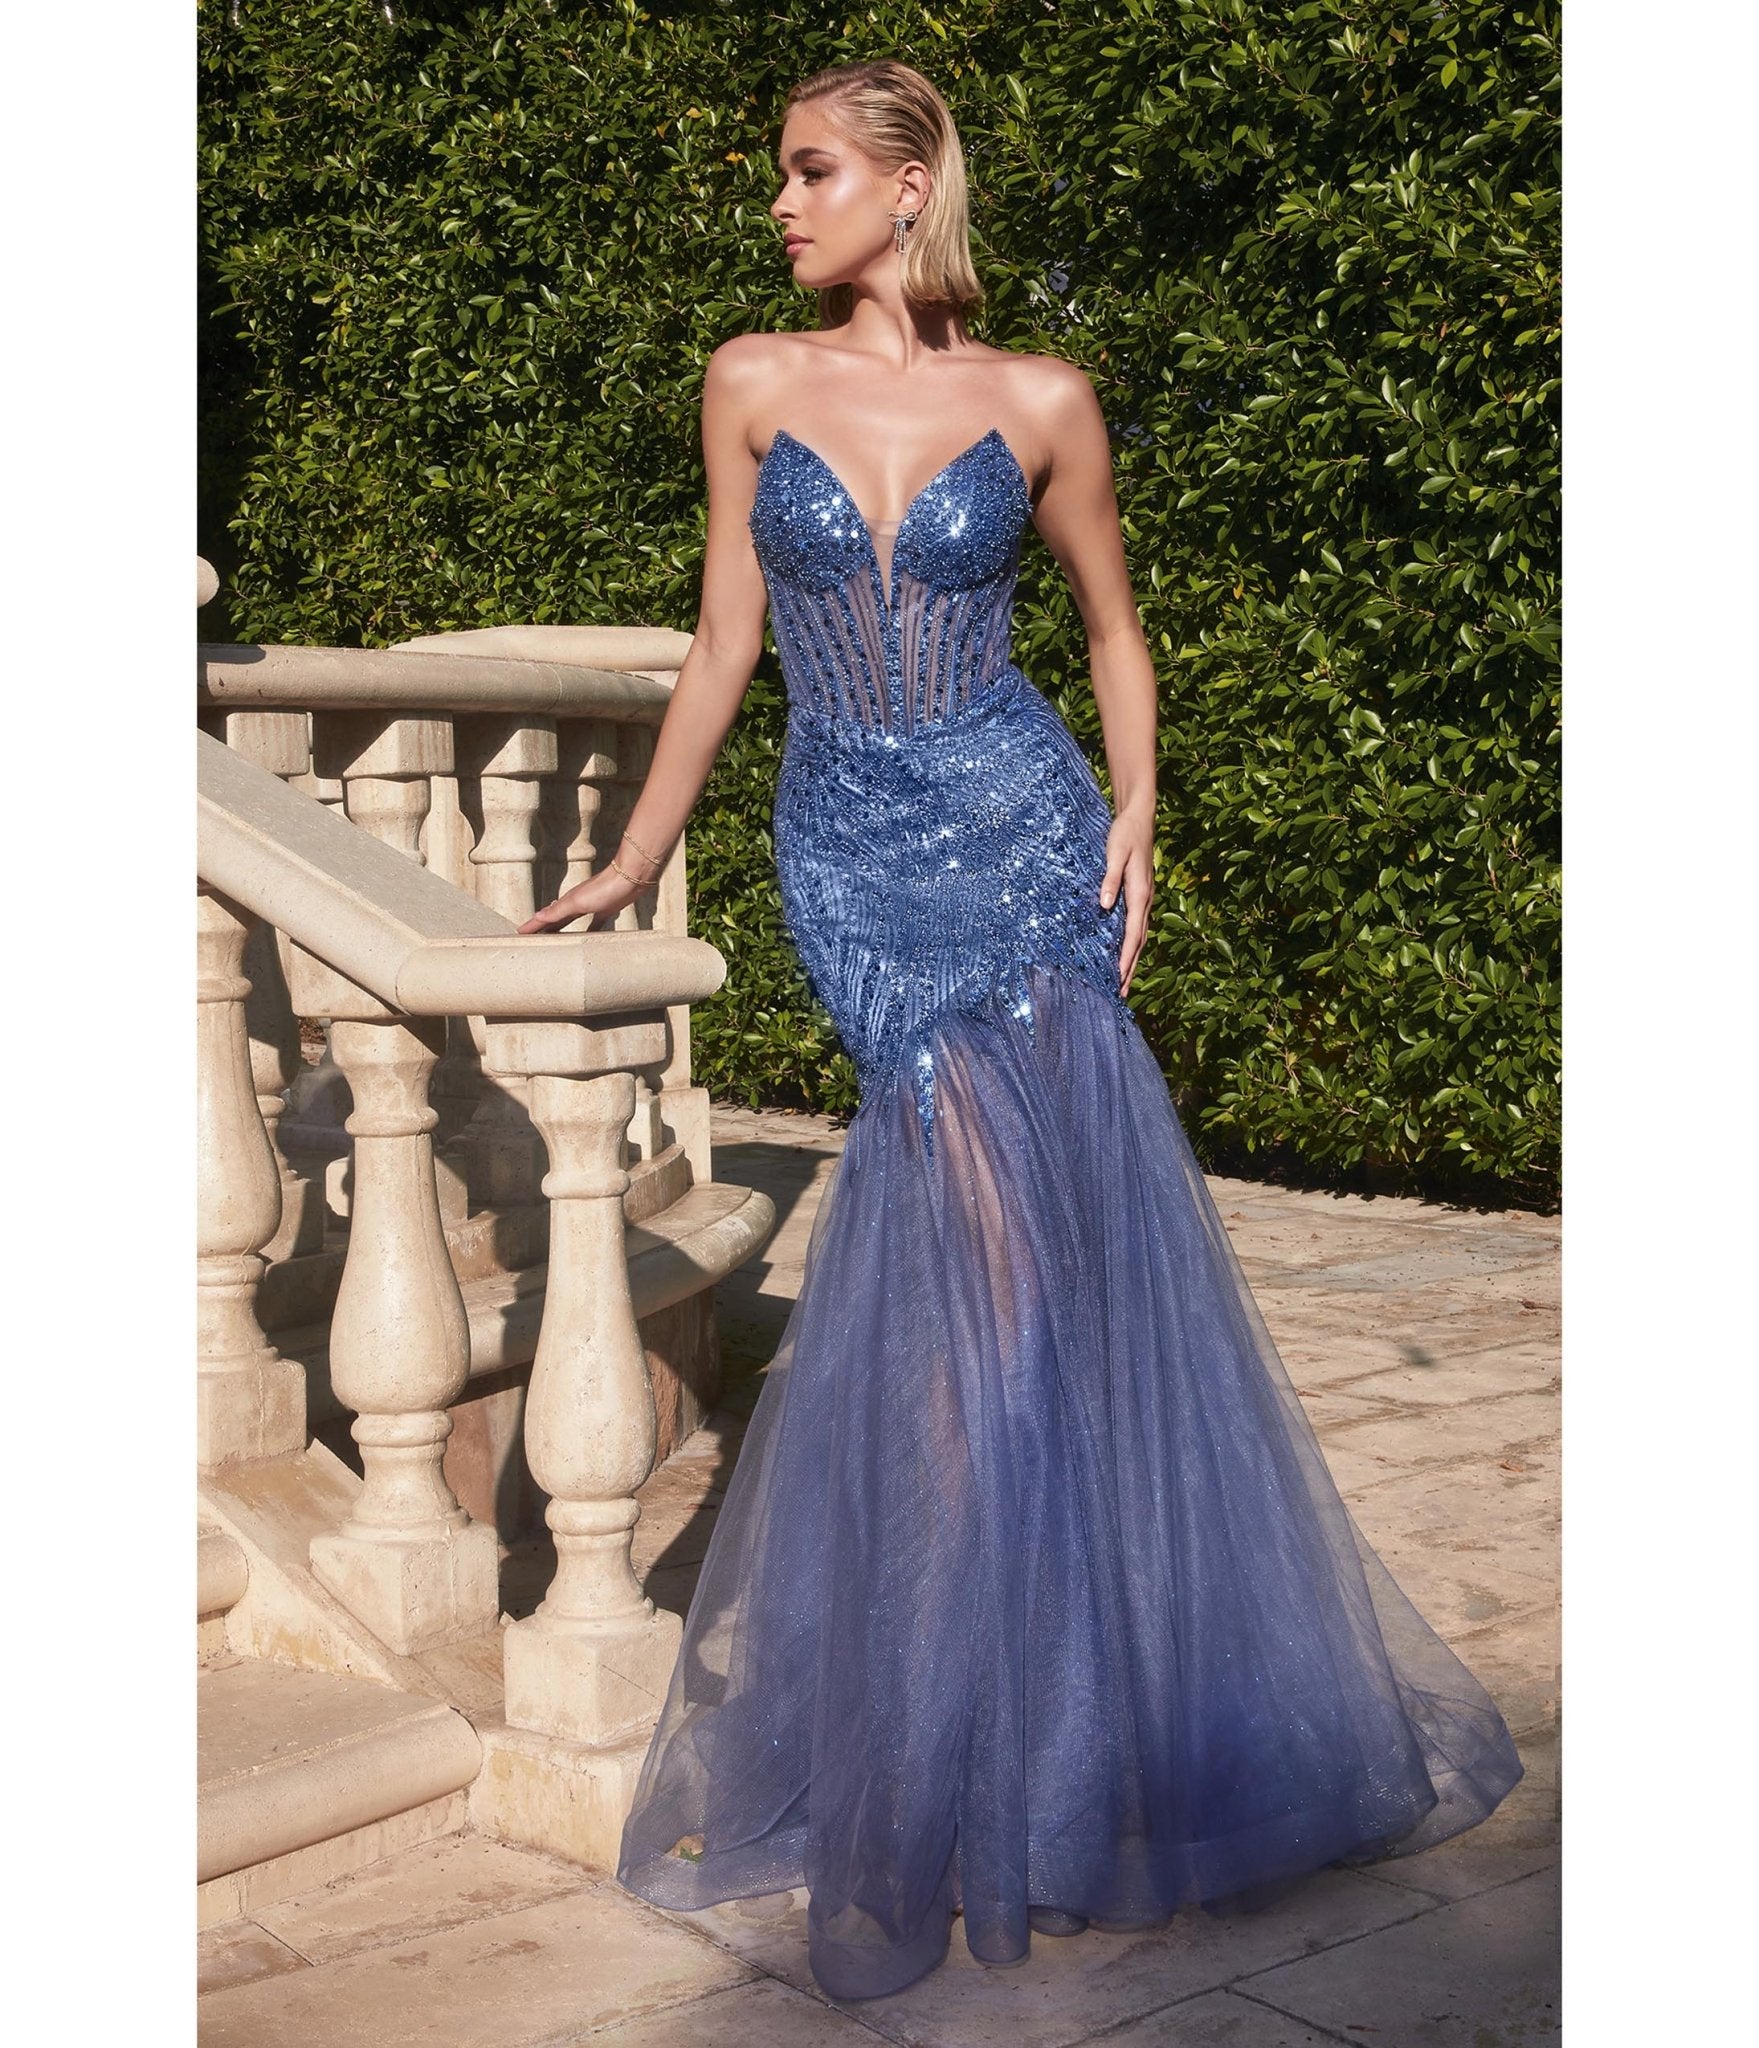 Lapis Blue Beaded Sequin Strapless Mermaid Prom Dress - Unique Vintage - Womens, DRESSES, PROM AND SPECIAL OCCASION